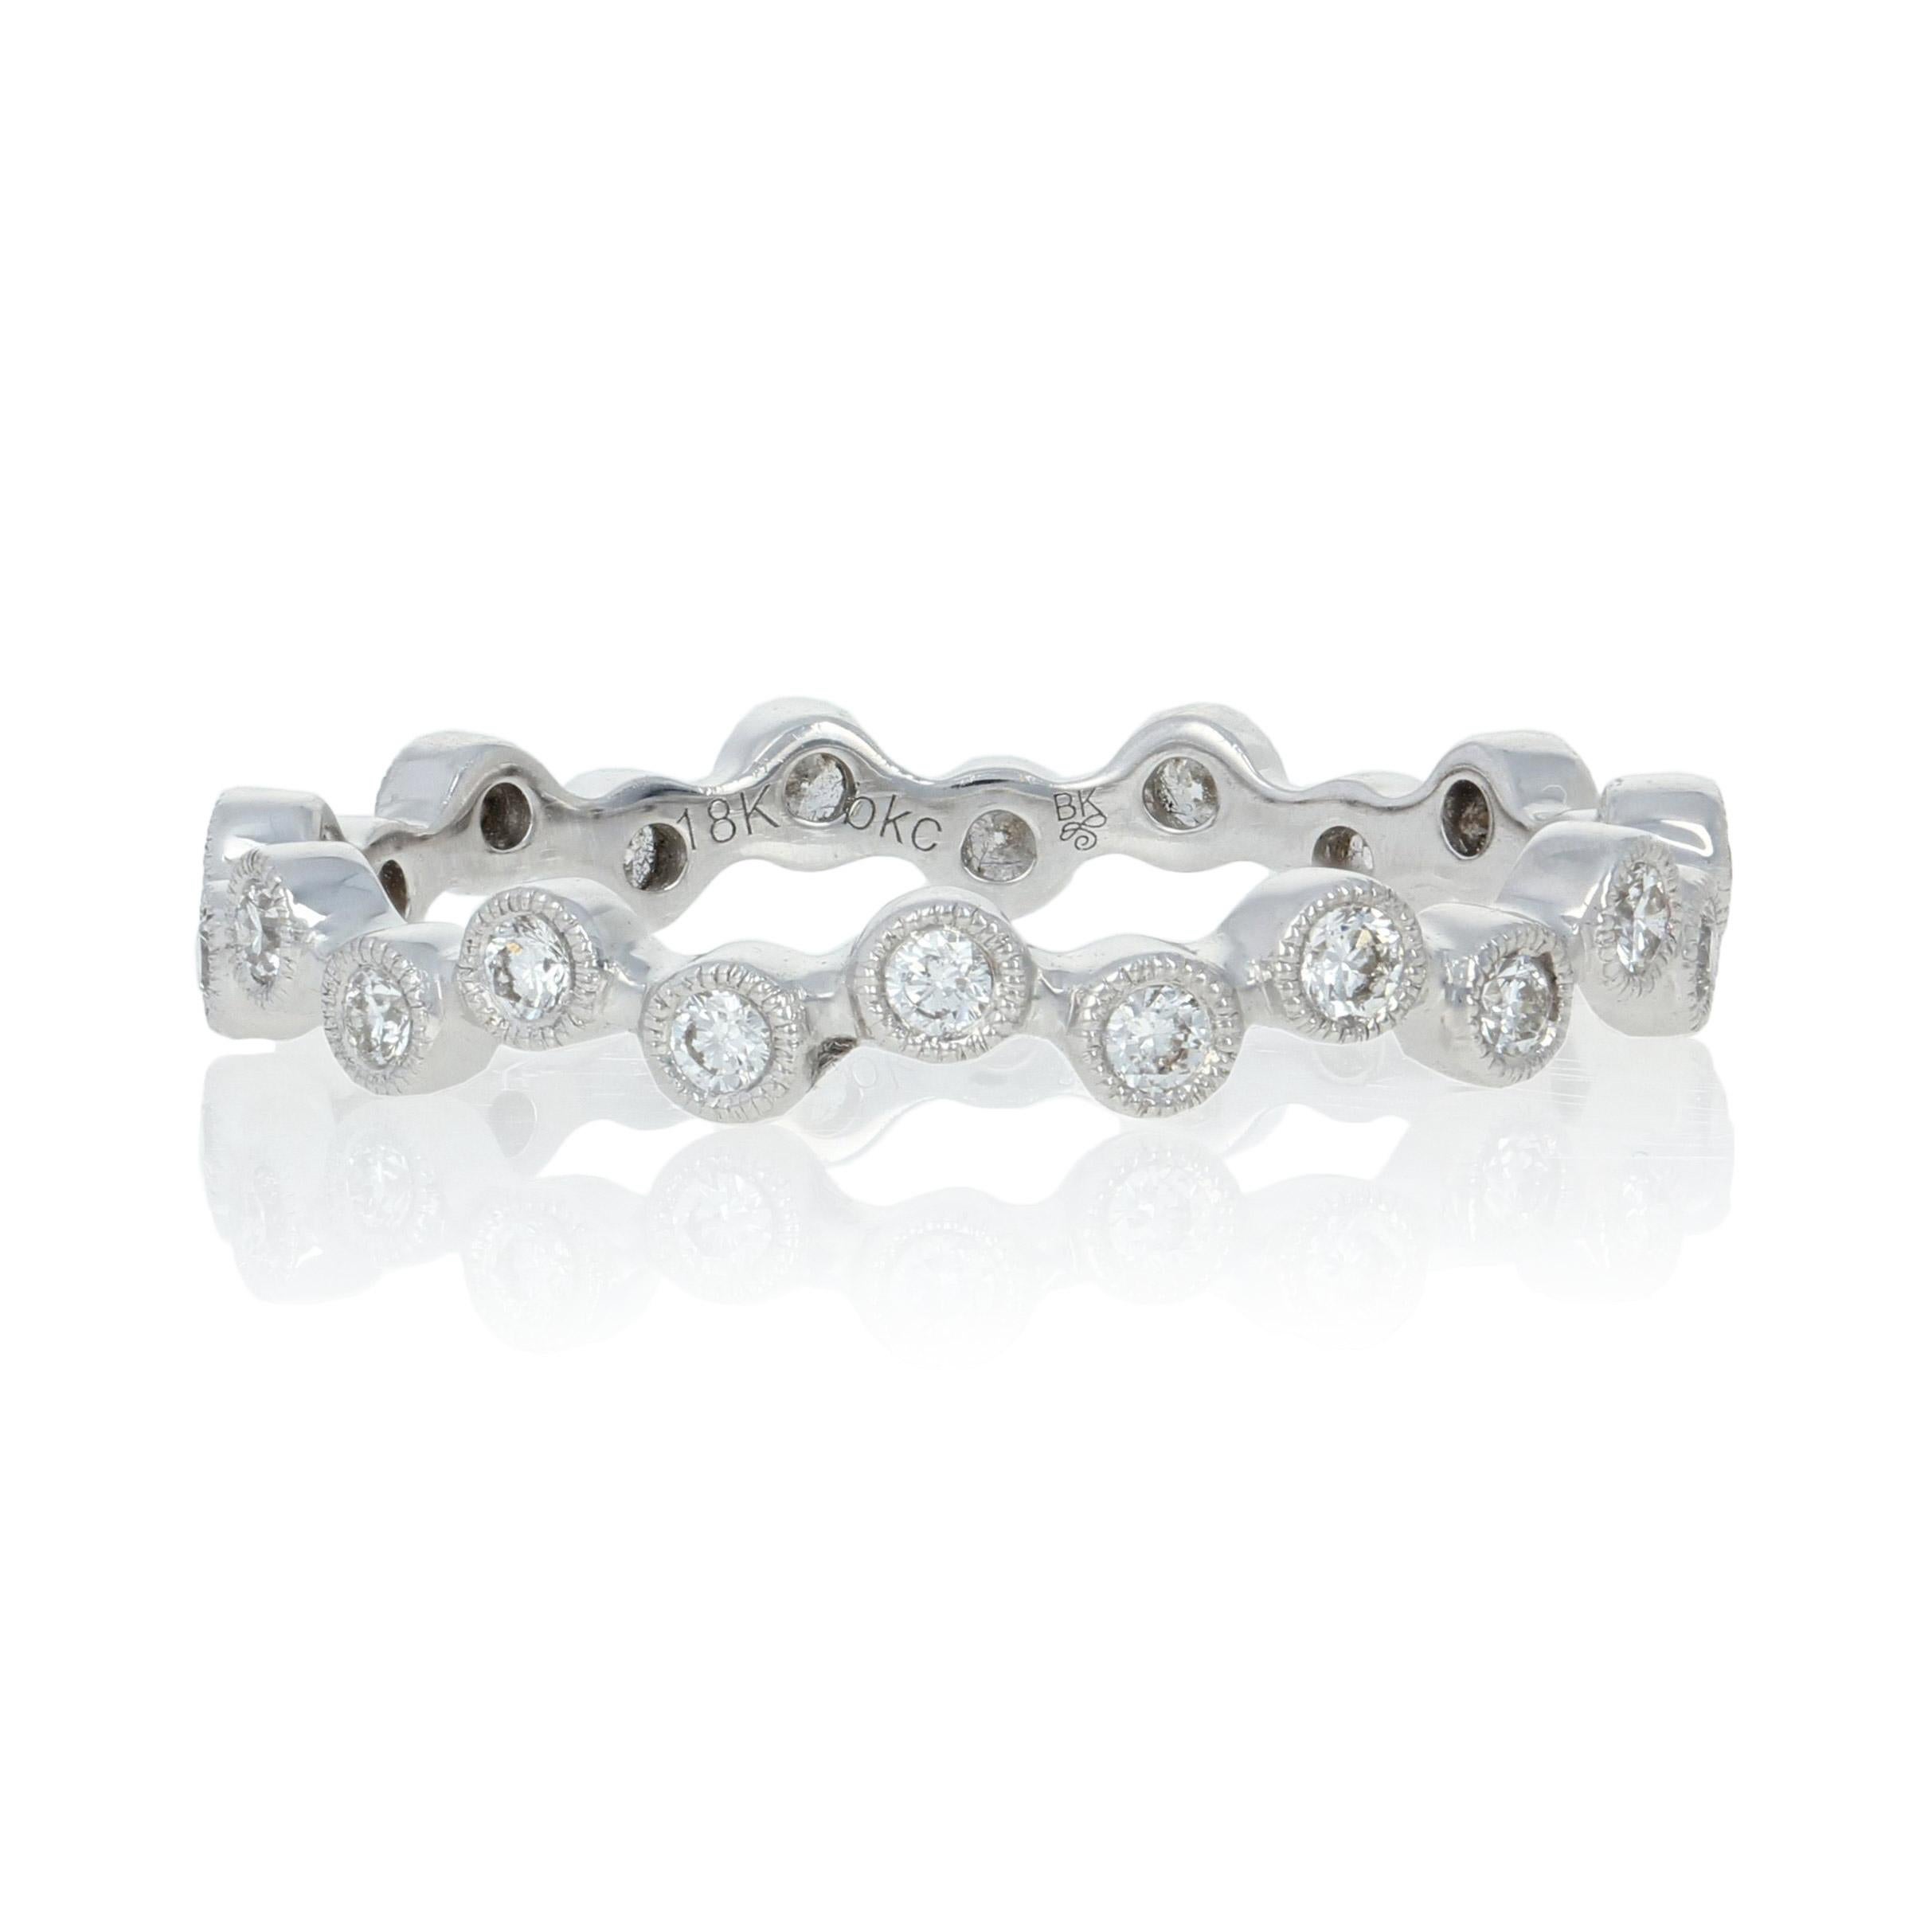 Size: 6 1/2

Brand: Beverly K.

Metal Content: Guaranteed 18k Gold as stamped

Stone Information: 
Natural Diamonds  
Clarity: VS1 - VS2 
Color: G - H   
Cut: Round Brilliant
Total Carats: 0.31ctw

Style: Eternity Band
Face Height (north to south):